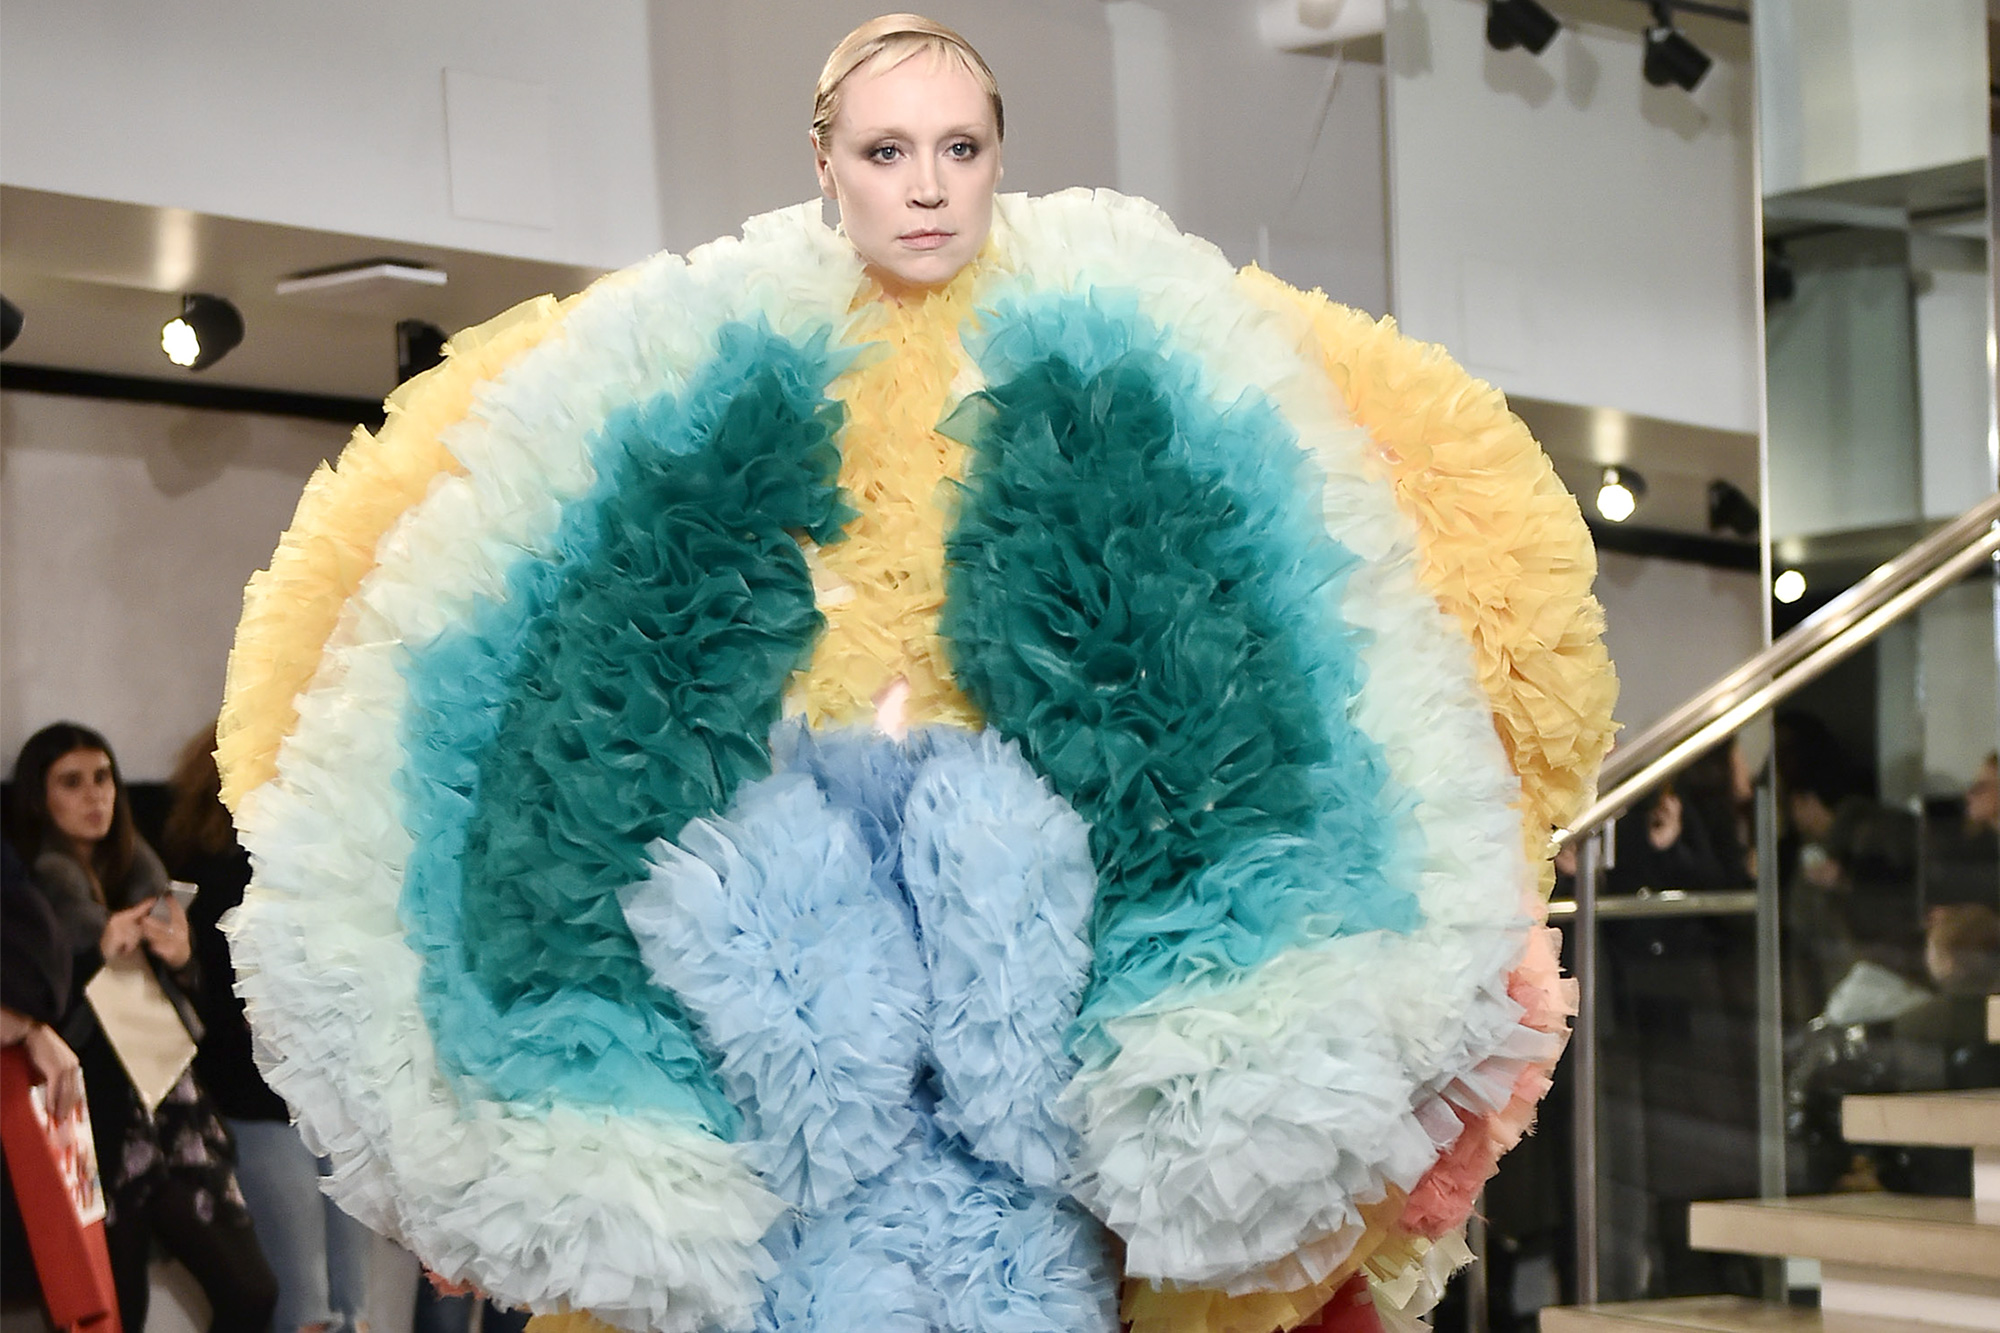 Gwendoline Christie walks the runway for the Tomo Koizumi fashion show during New York Fashion Week at Marc Jacobs Madison on February 8, 2019 in New York City.